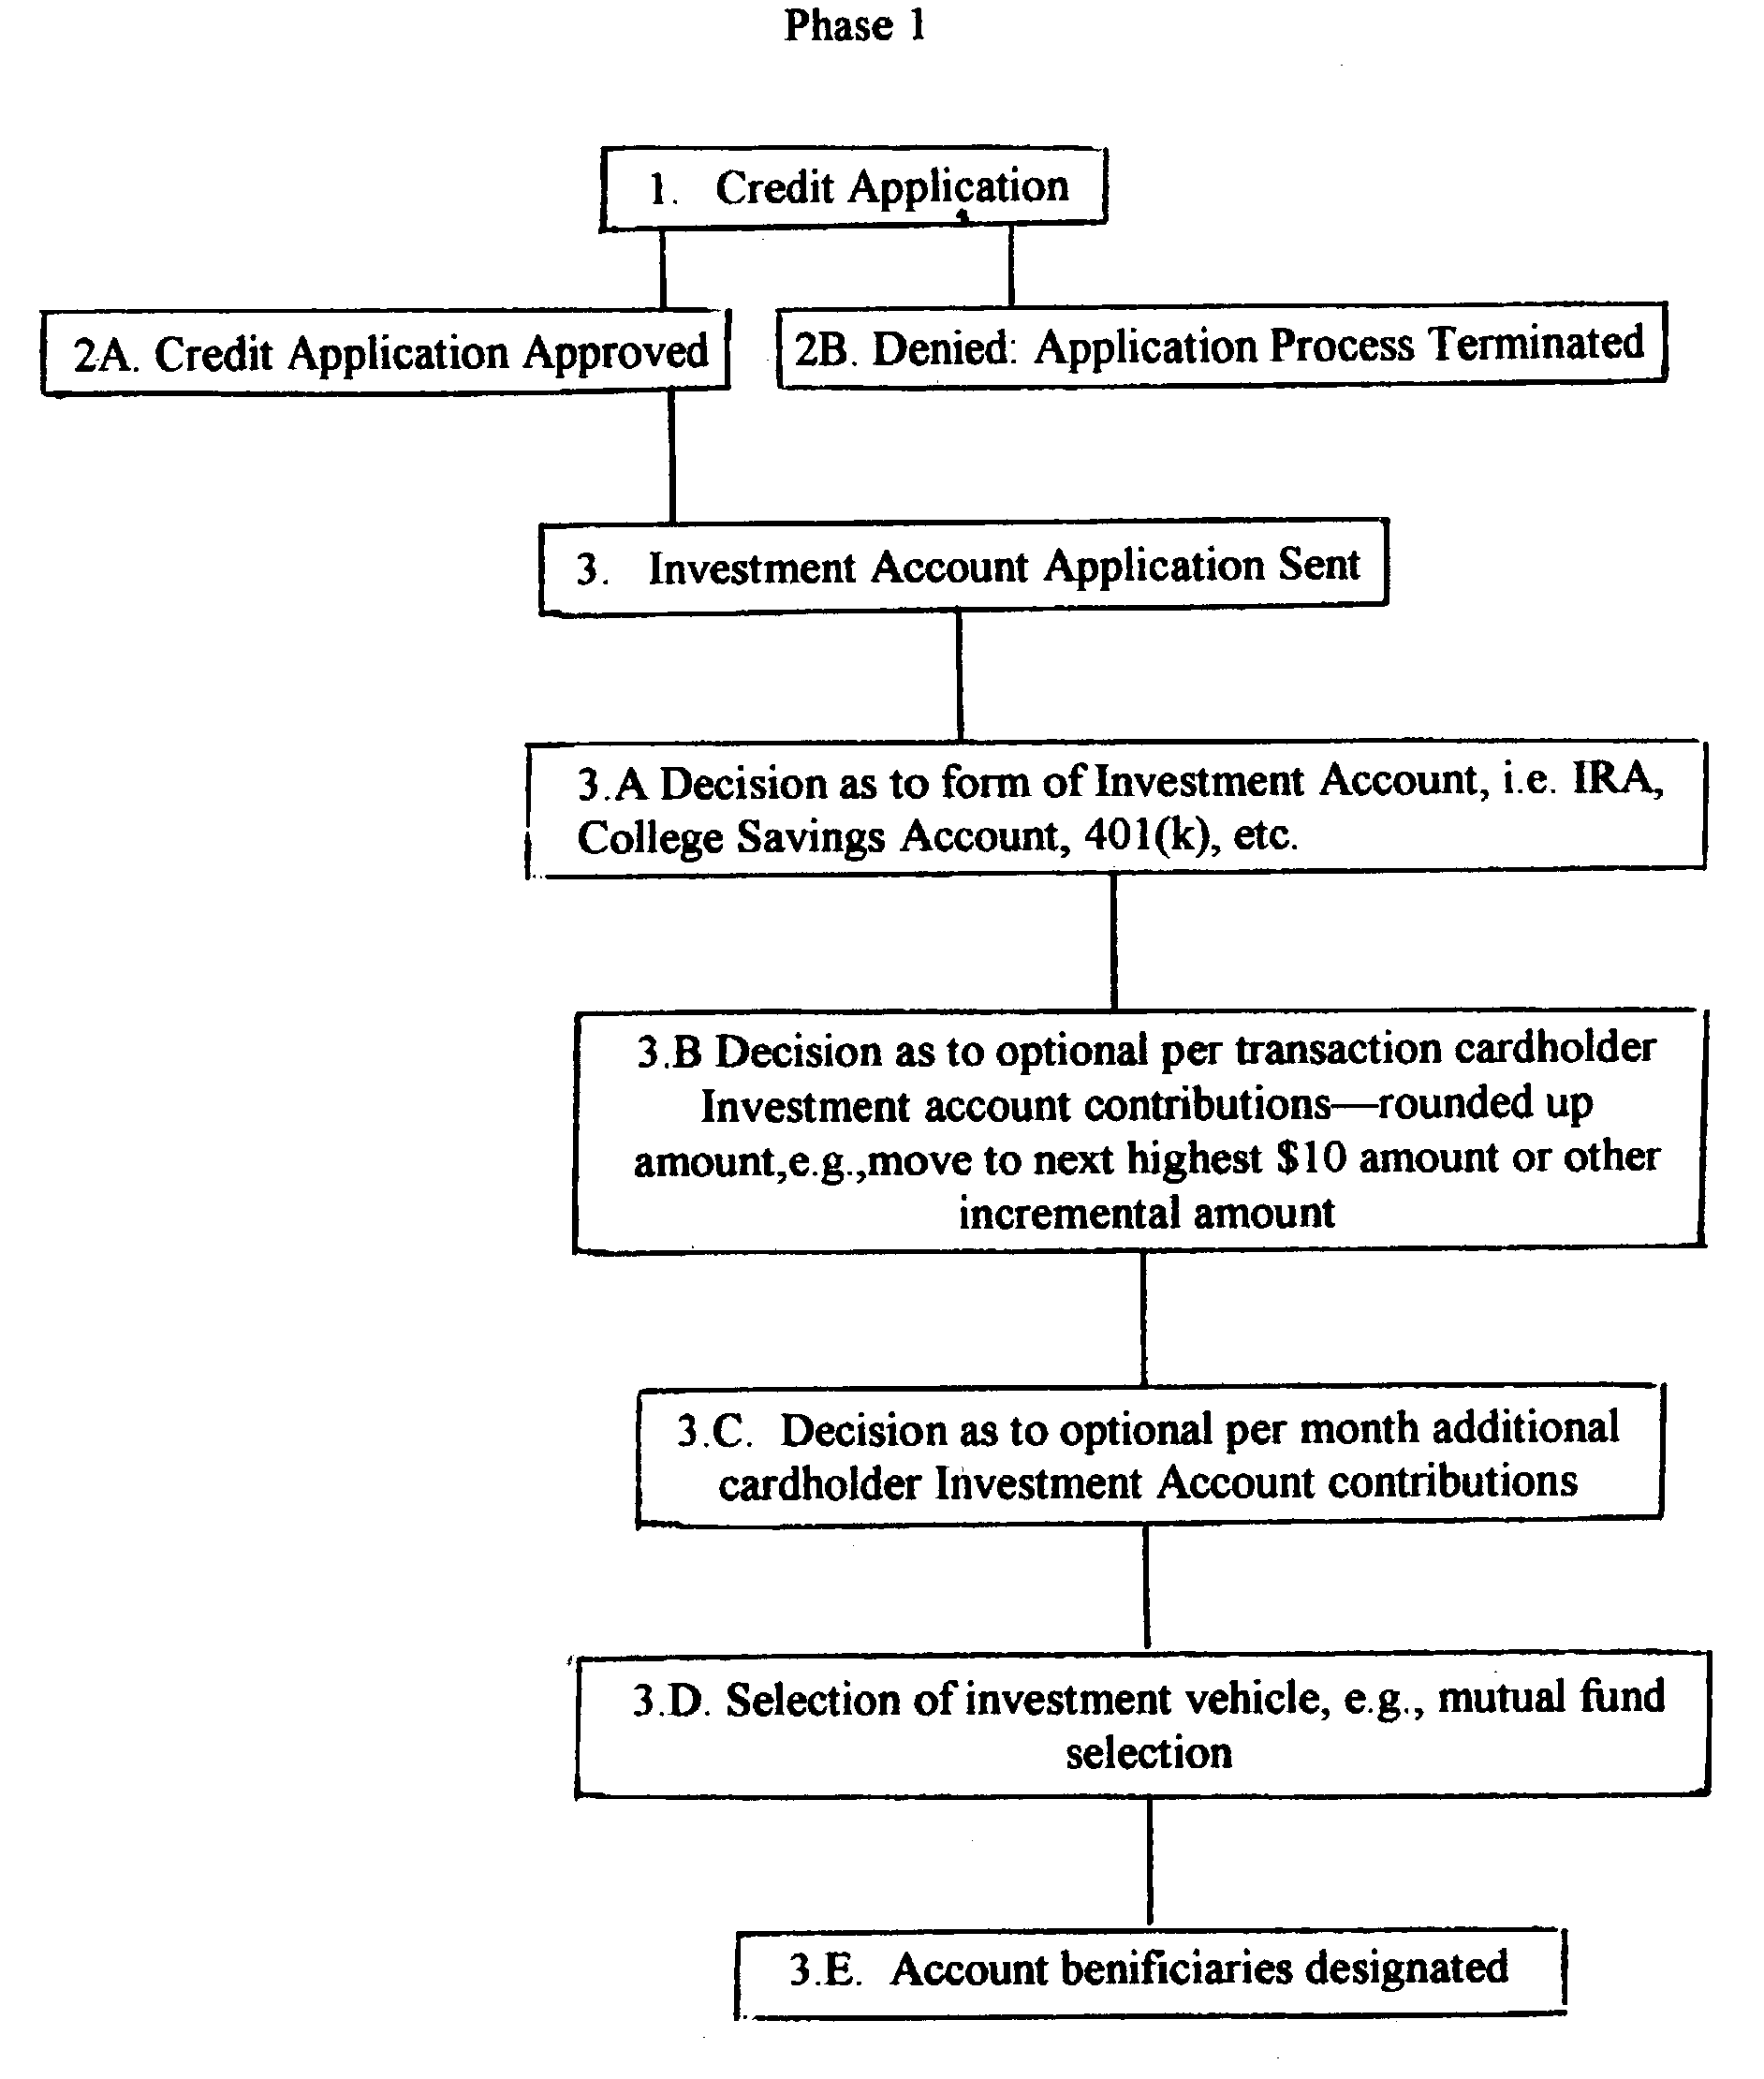 System and method for automatically investing in an investment or savings account by using the "rounded up" of credit card purchase amounts to produce savings/investment amounts